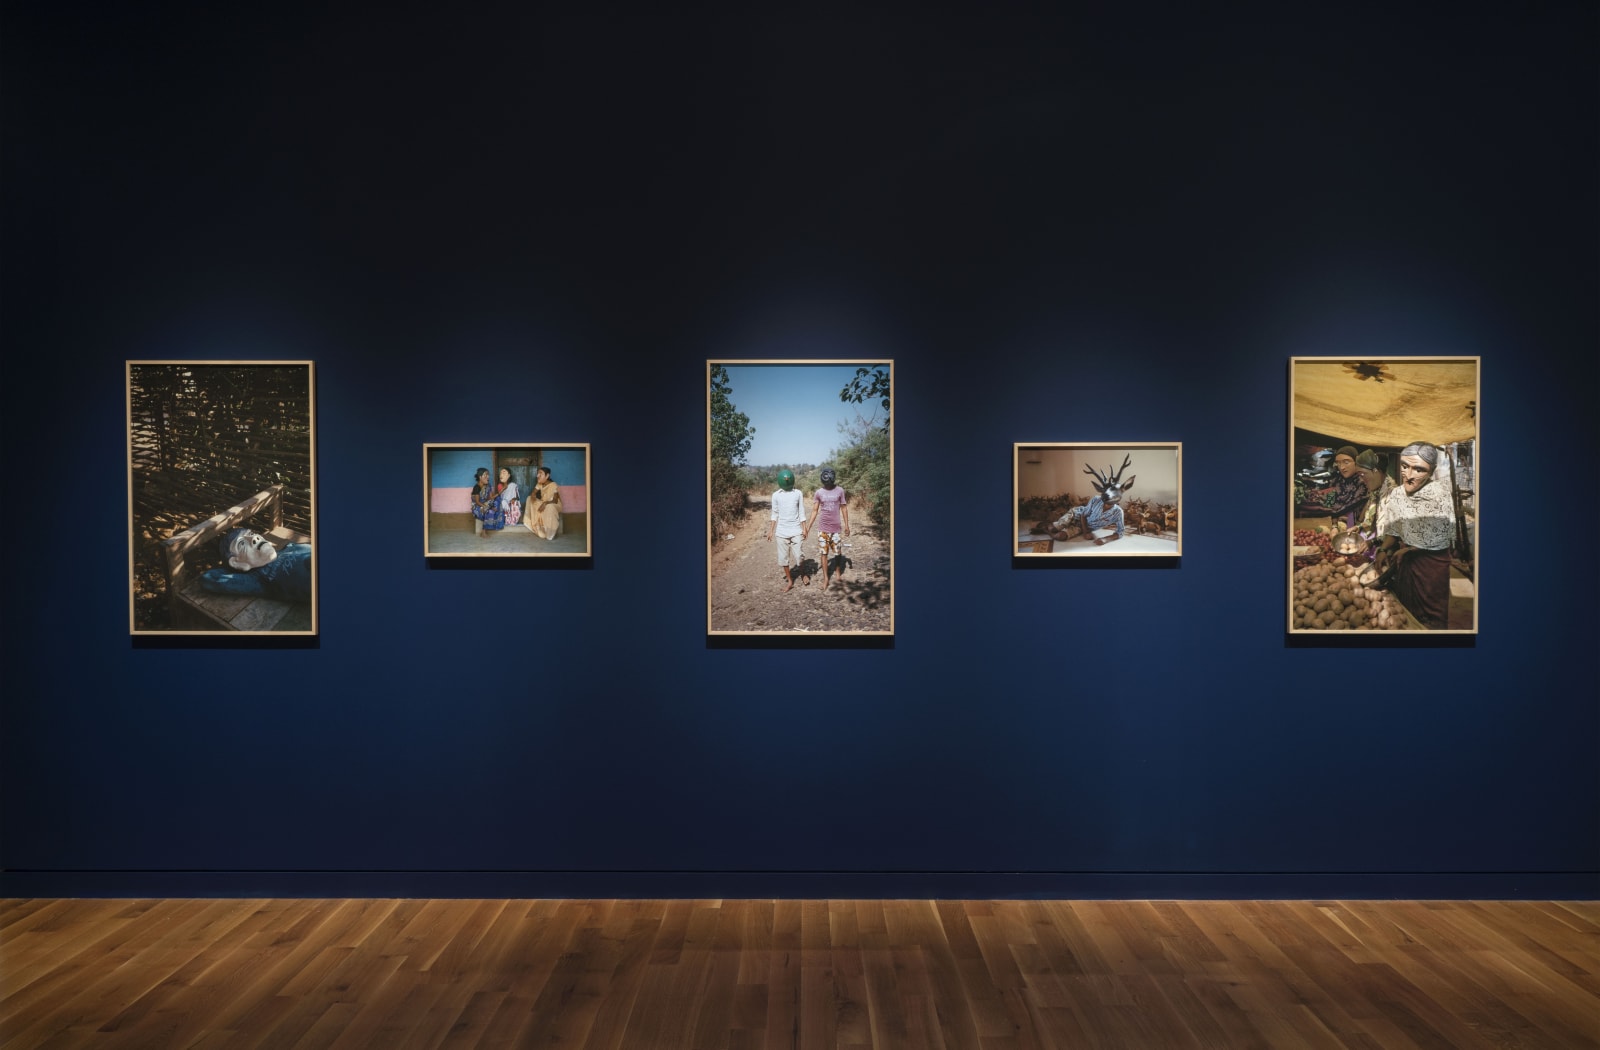 Installation View, Gauri Gill at Columbus Museum of Art, Object/Set: Gauri Gill's Acts of Appearance, November 1, 2019 - February 2, 2020, Columbus, OH. Photo By: Luke Stettner